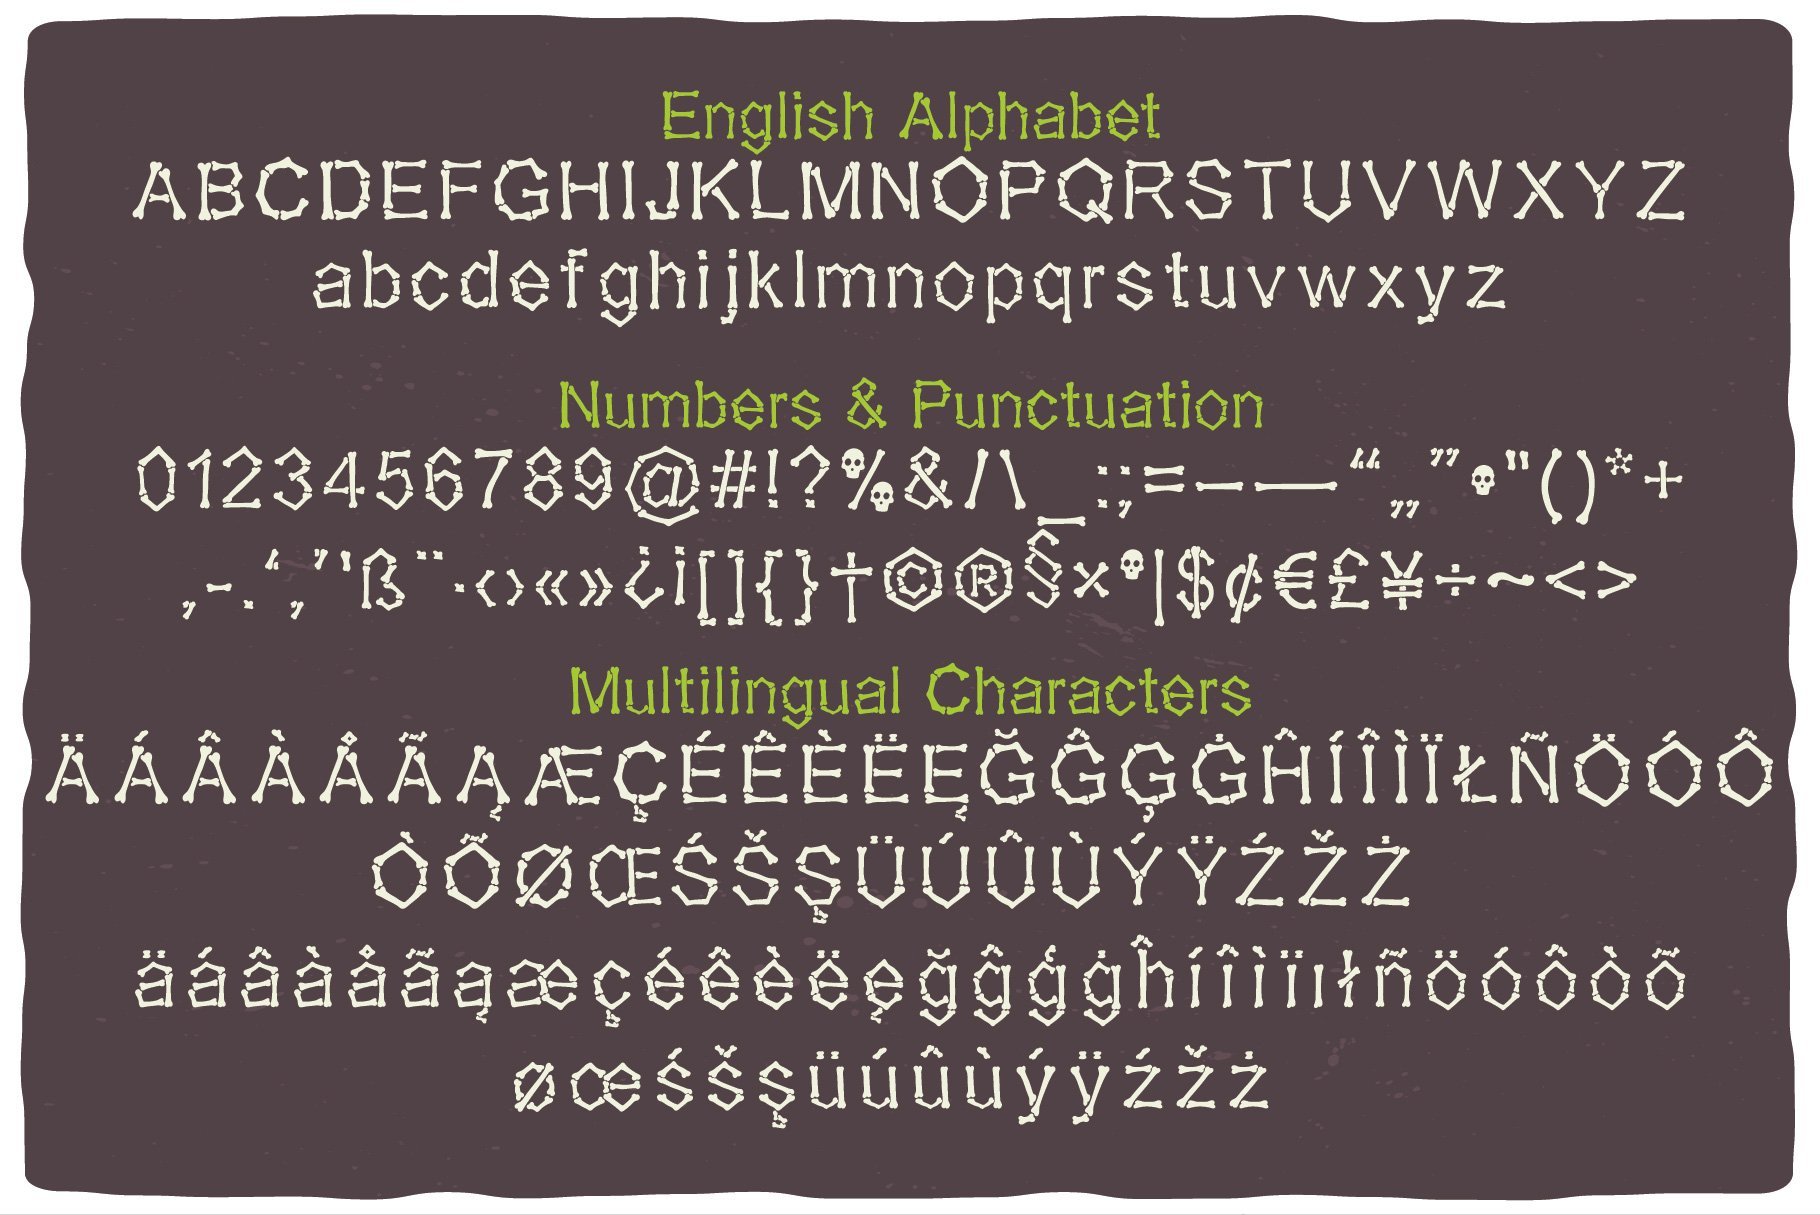 All characters and letters are depicted for understanding the general appearance of the font.